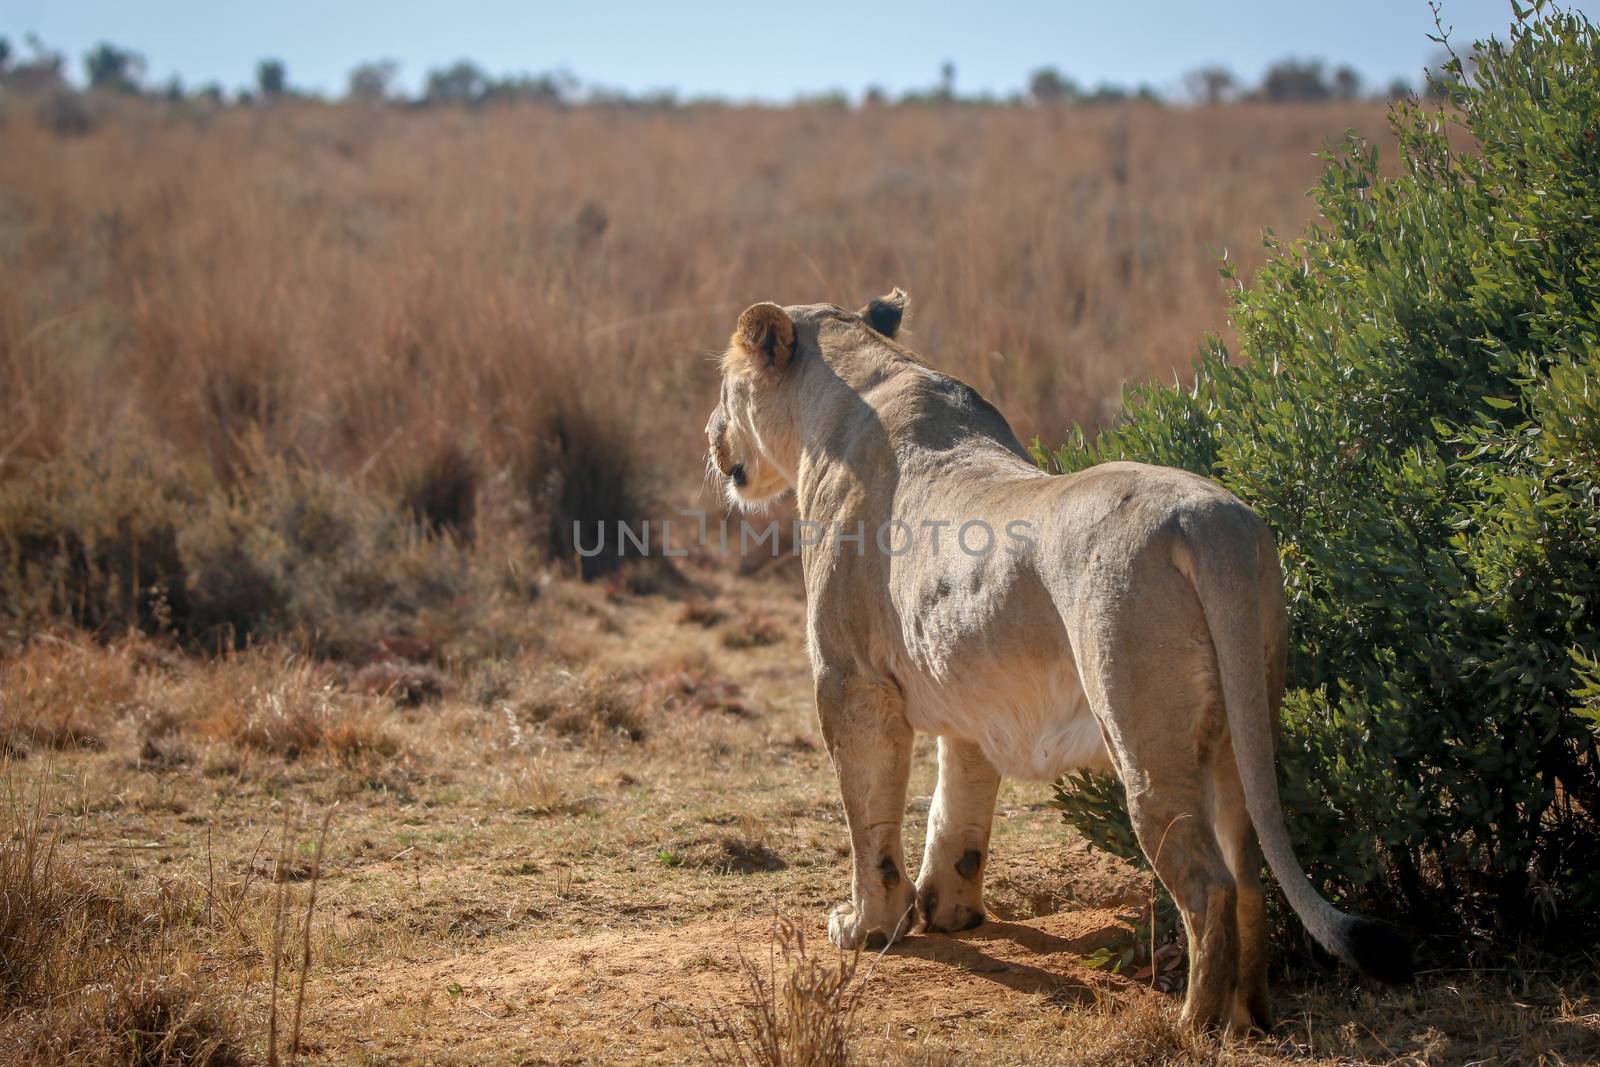 Lioness on the look out for prey in the Welgevonden game reserve, South Africa.